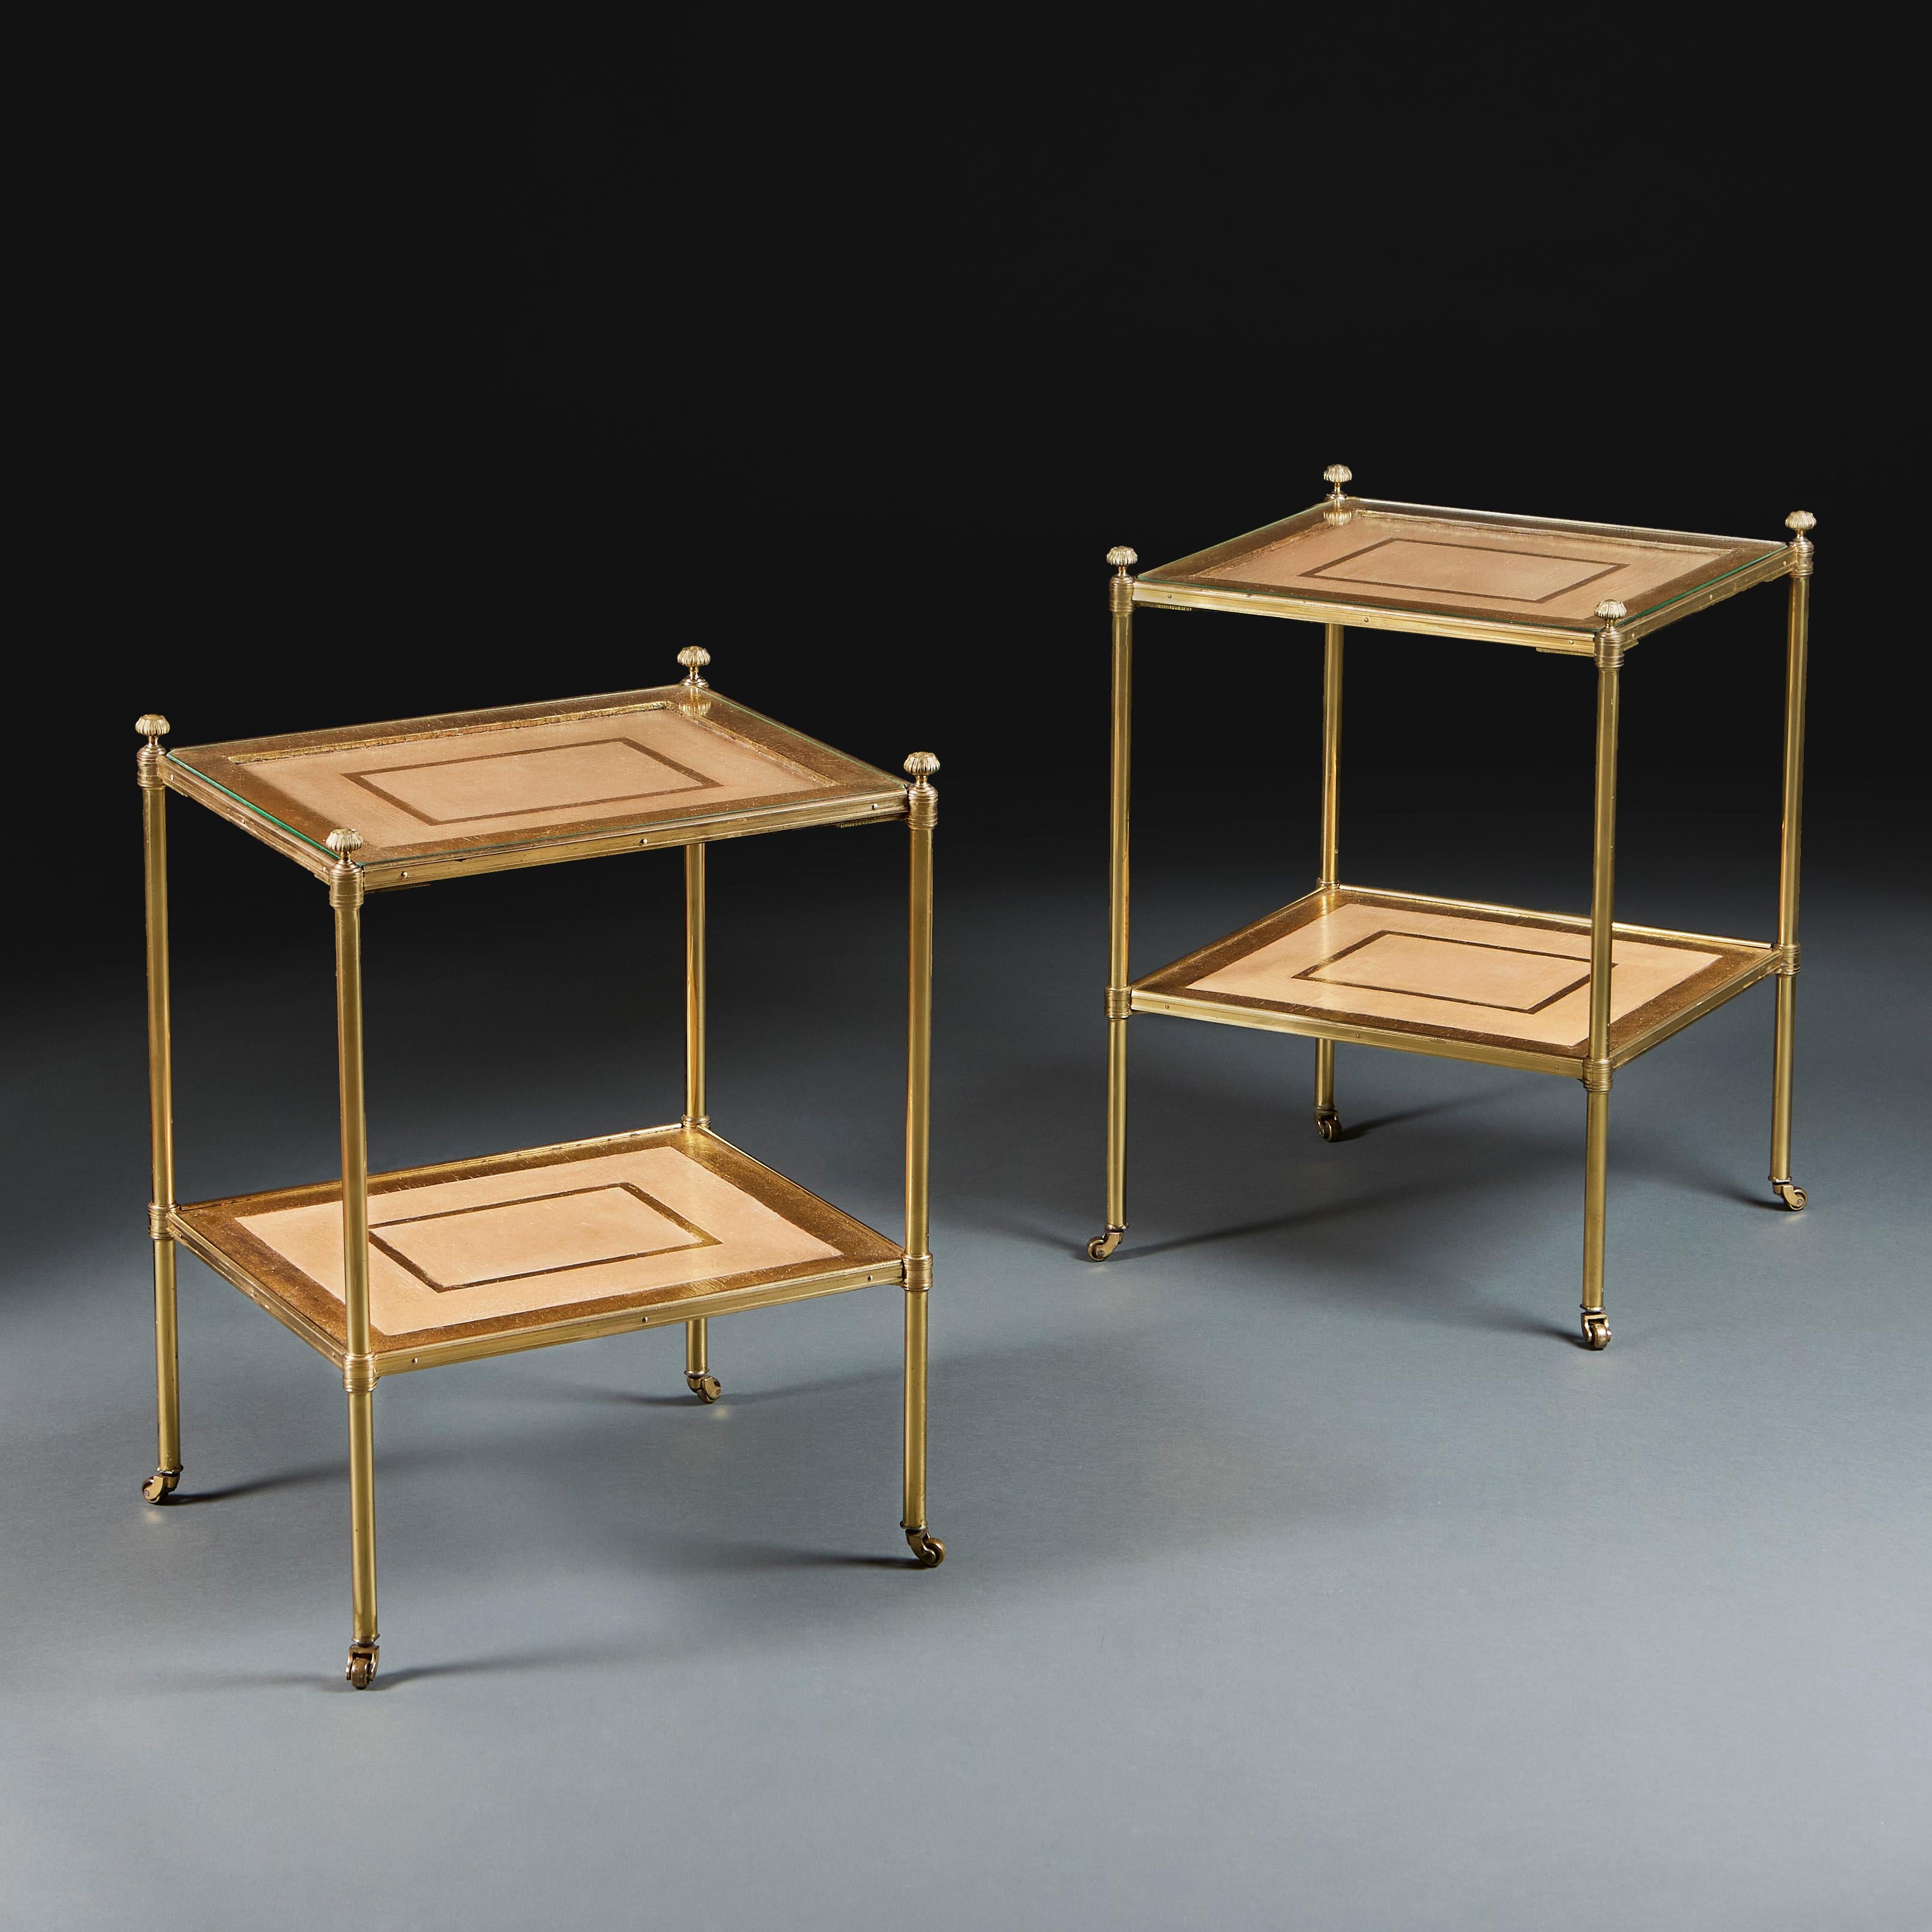 England, circa 1920
A pair of early twentieth century two tier brass etageres, probably by Mallett & Son, with craquelure surfaces in cream and gilt, the uprights surmounted by chased acanthhus leaf finials and terminating in brass castors.
Height